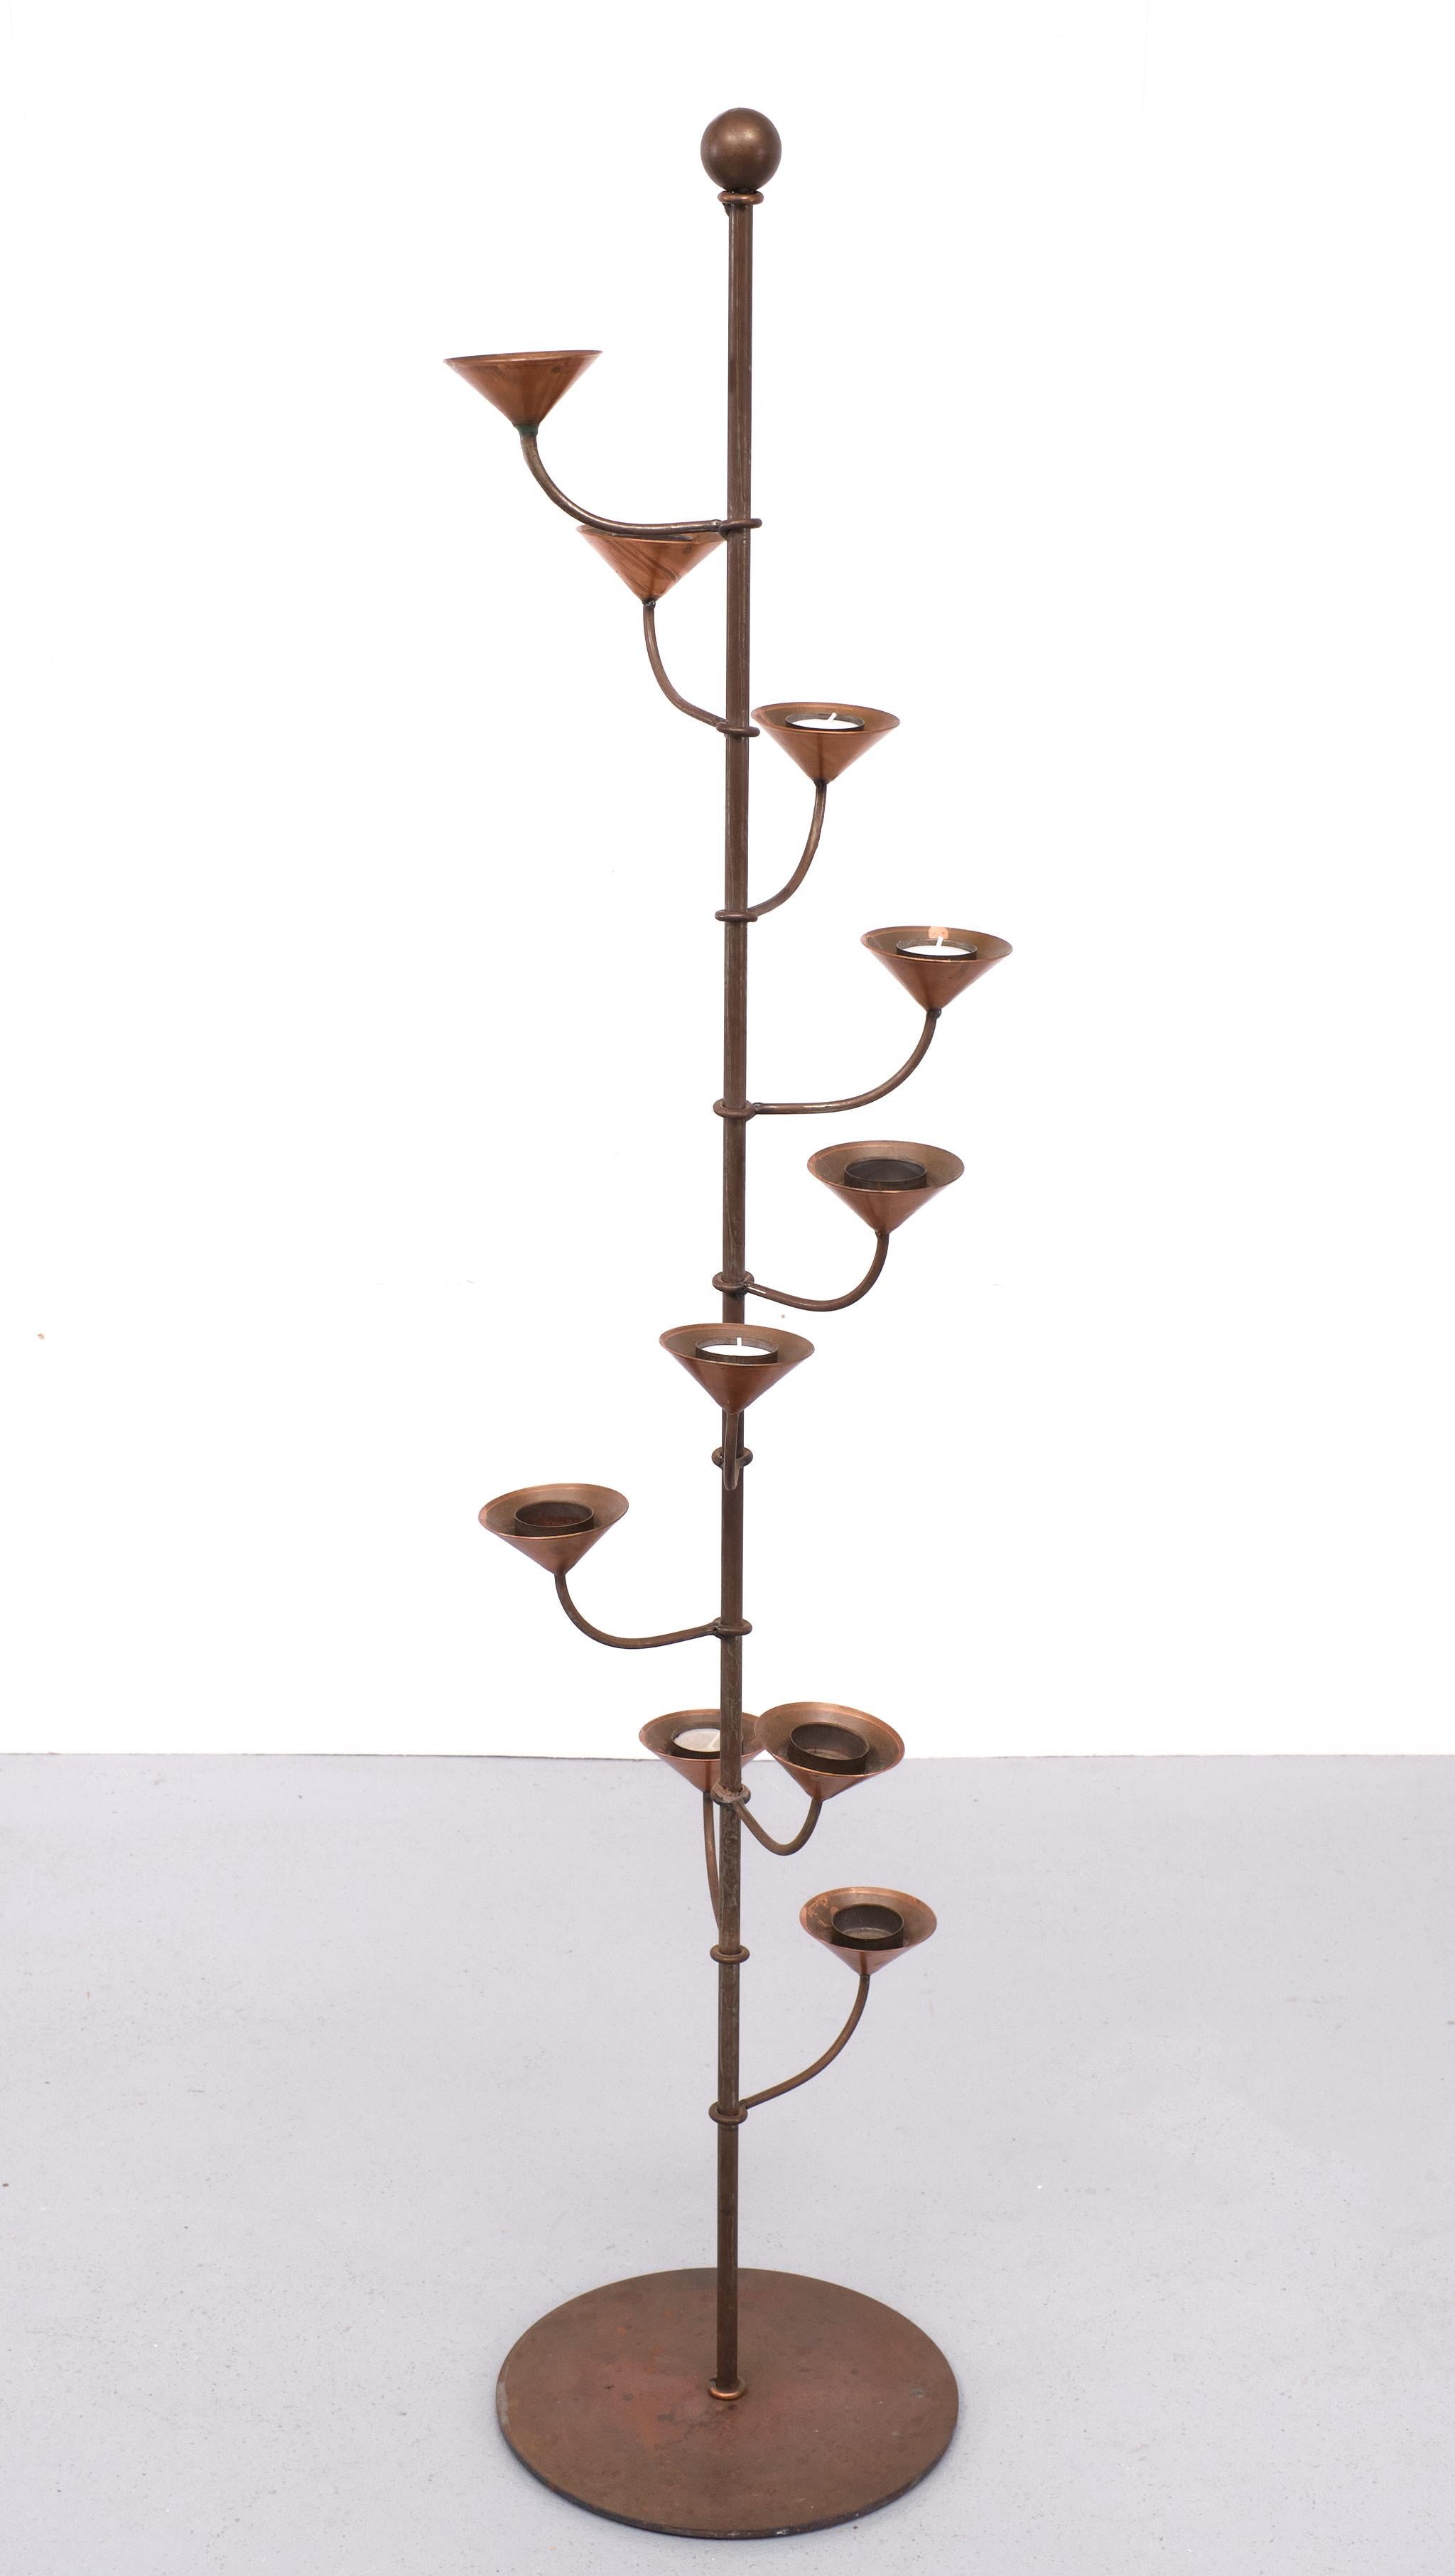 Very nice Mid Century modern standing candle stick . Ten candle holders 
For Tea Lights or others . Hand forged Steel upright ,comes with cone shaped Copper candle holders . So decorative .

Please don't hesitate to reach out for alternative